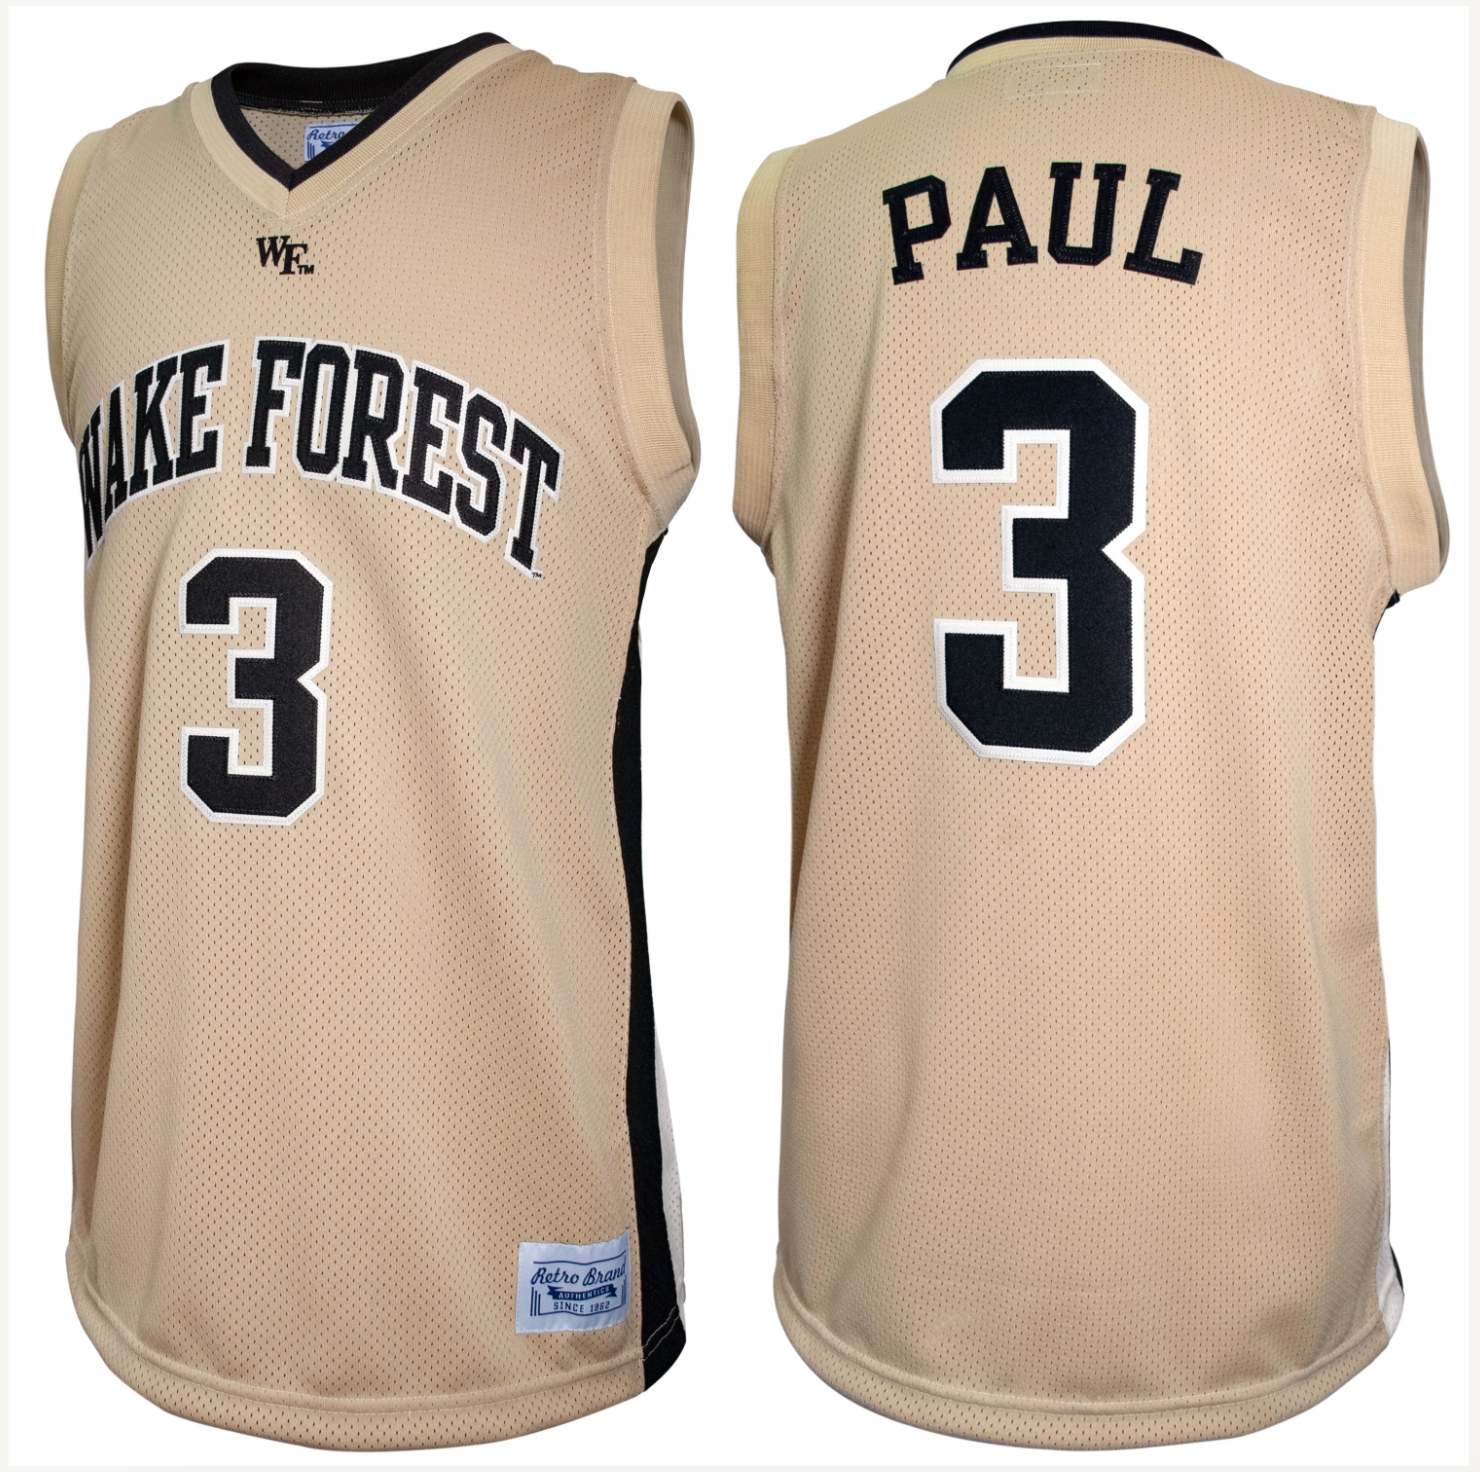 Wake Forest Chris Paul Throwback Jersey